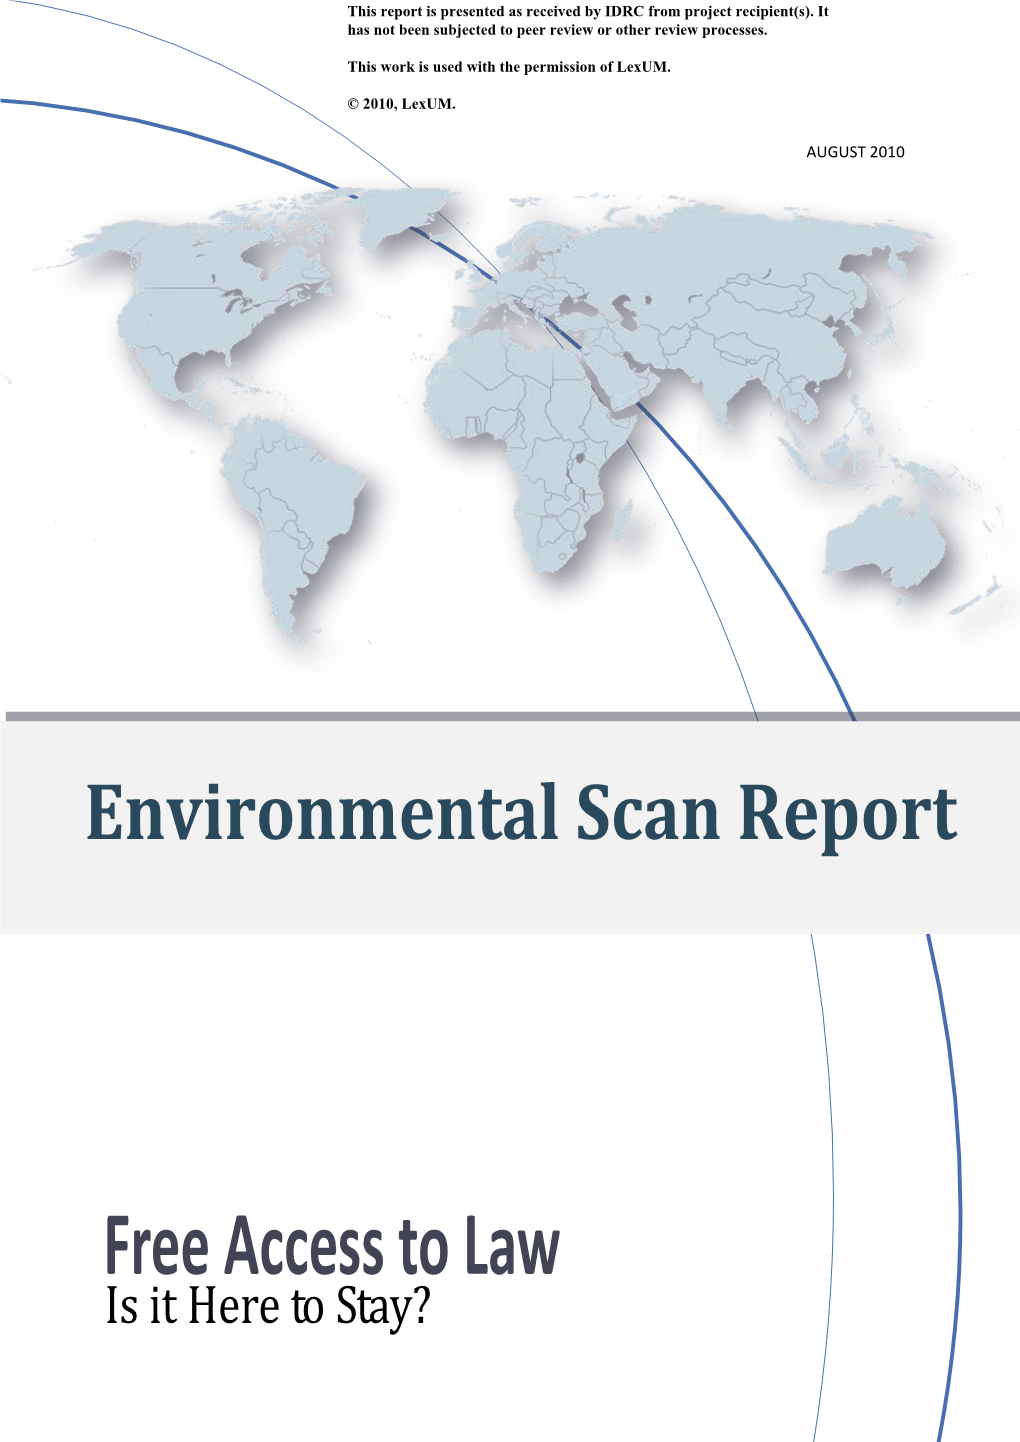 Environmental Scans Are the First Component of the “Free Access to Law – Is It Here to Stay” Global Study on the Sustainability of FAL Initiatives